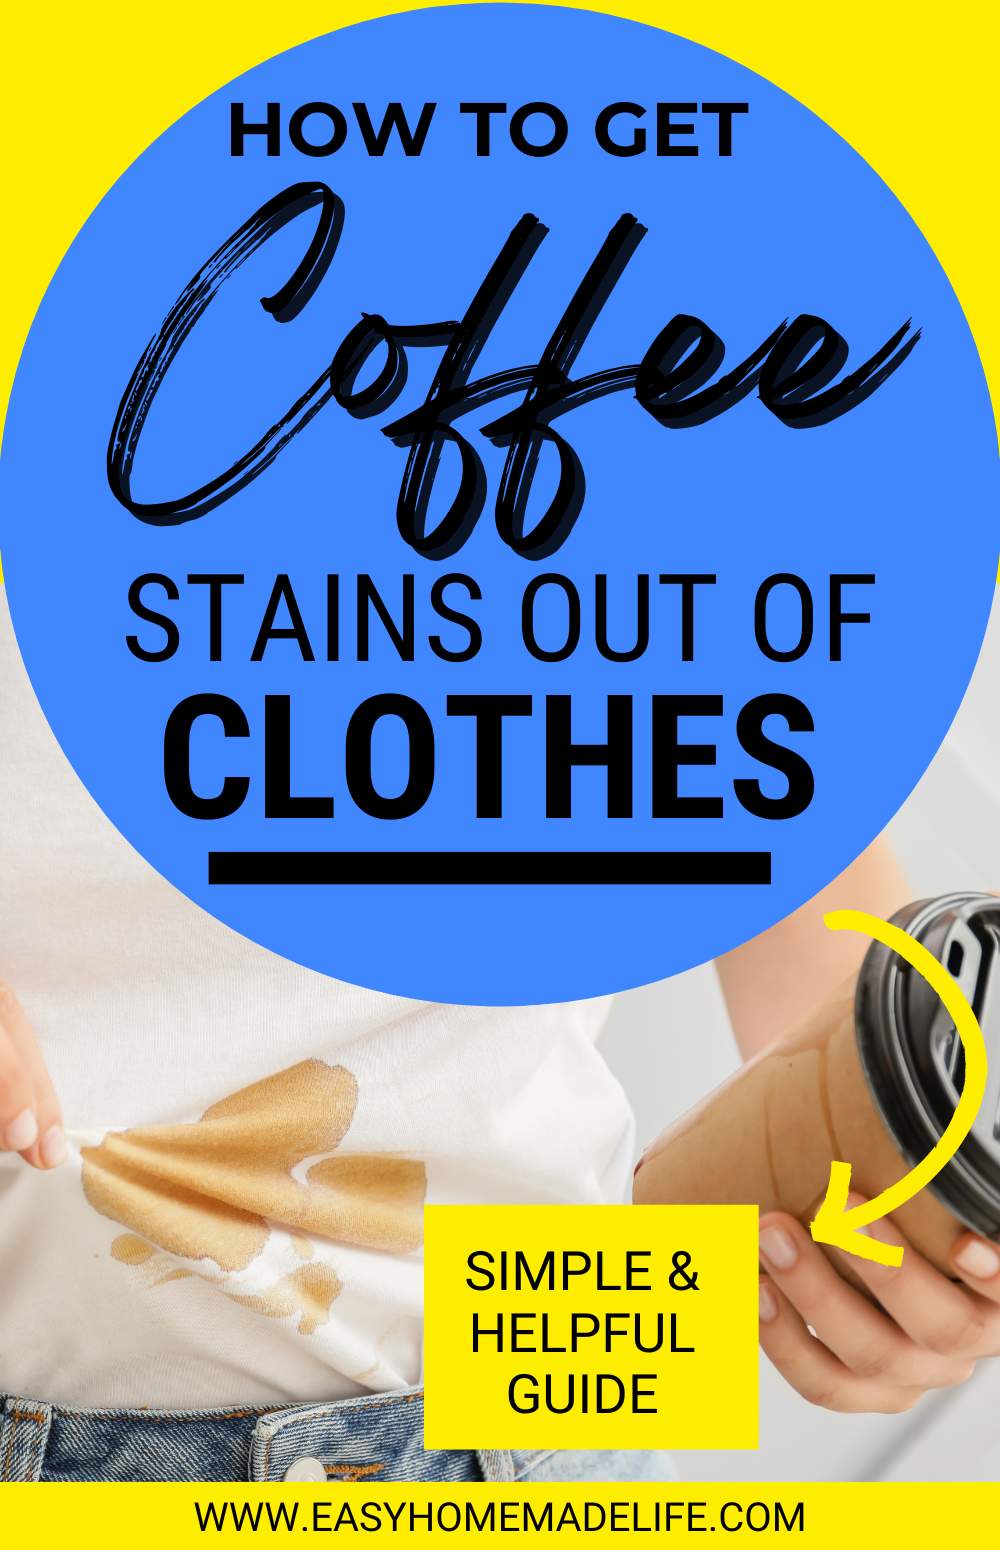 How to get coffee stains out of clothes. Simple and helpful guide.